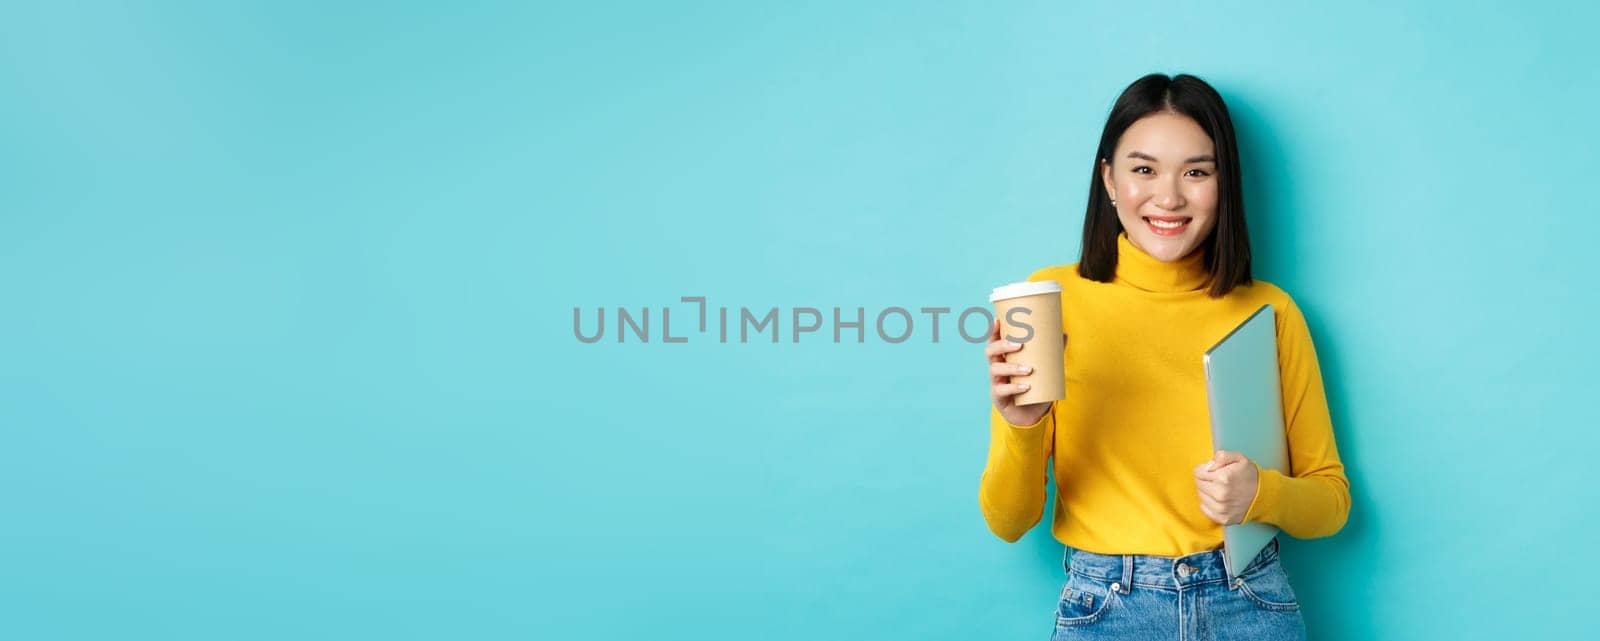 Stylish asian female student with cup of coffee standing over blue background, holding laptop in hand, smiling at camera, standing over blue background.